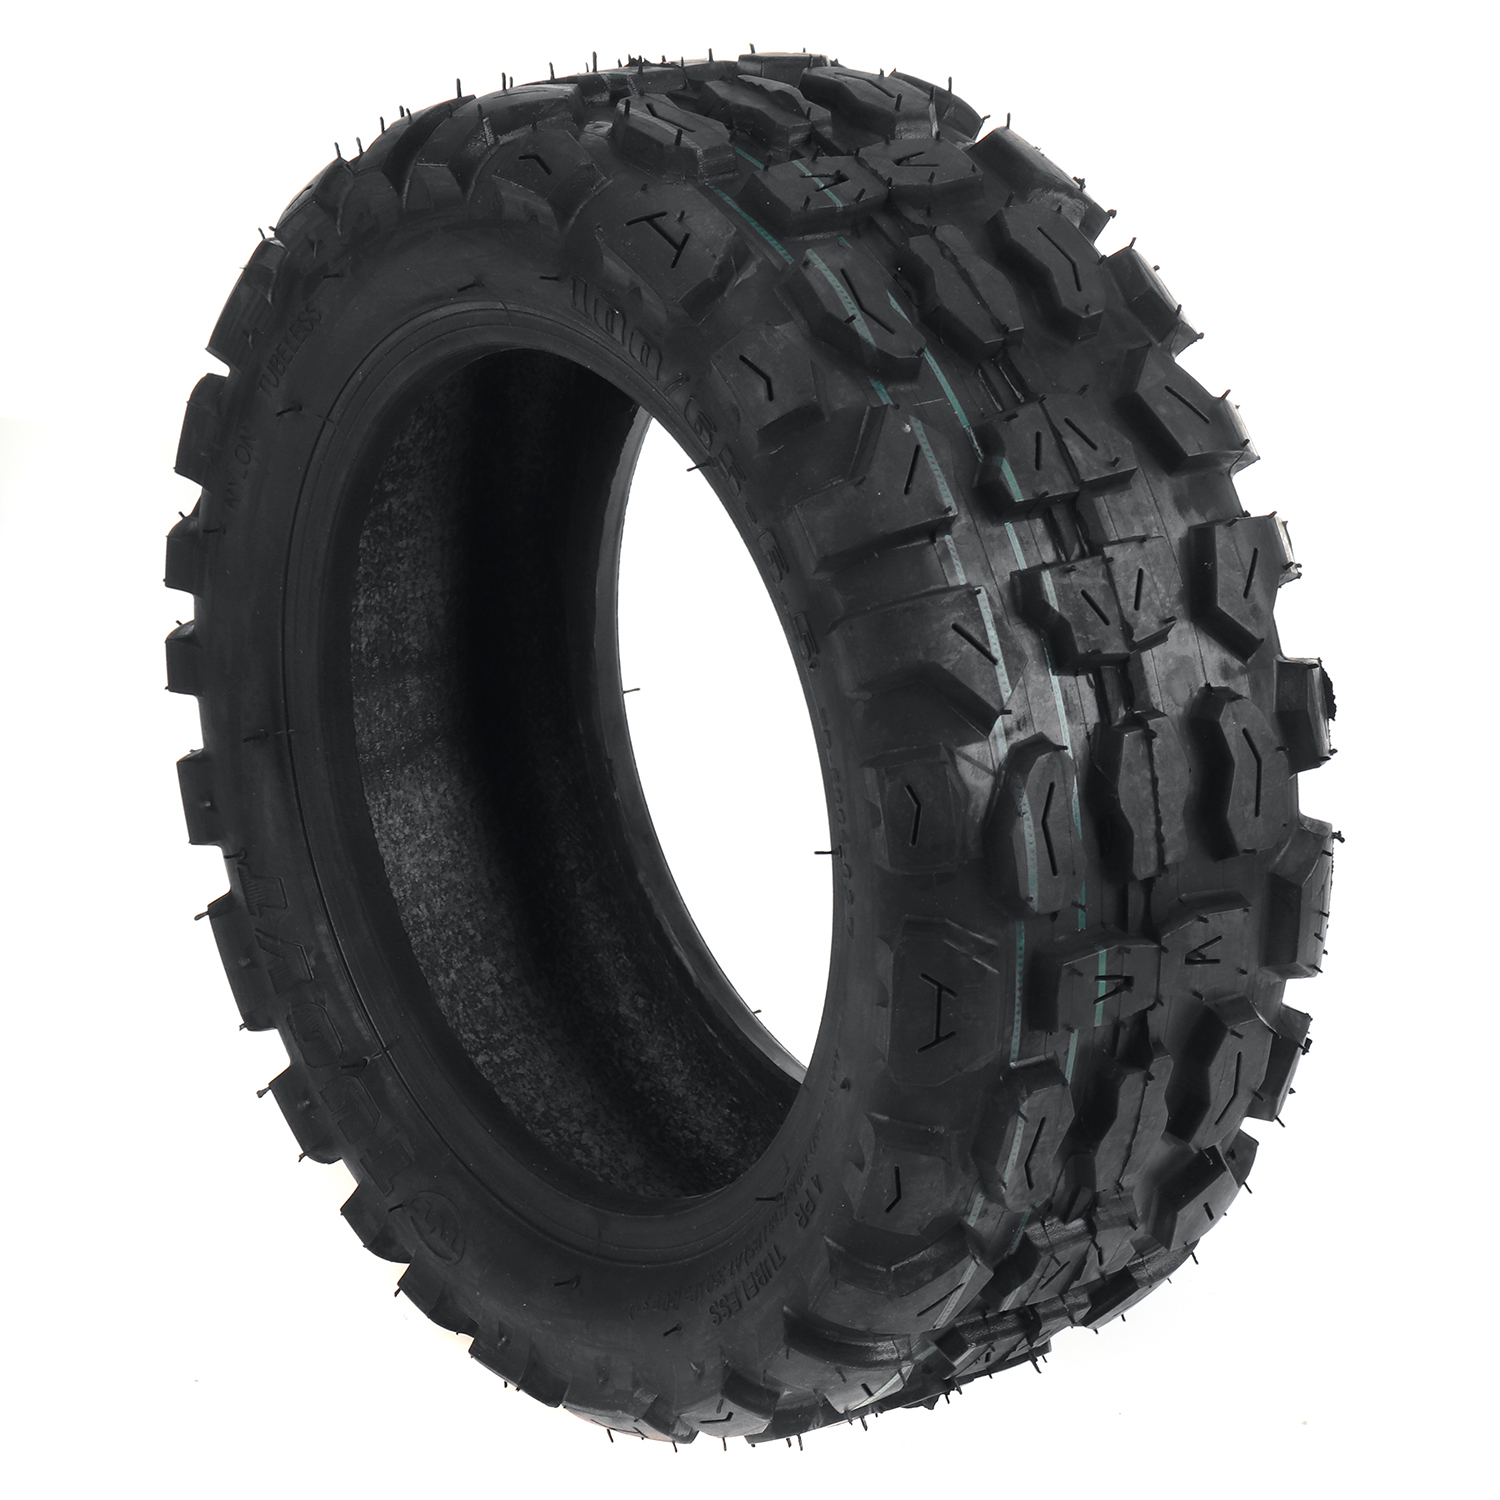 Find LAOTIE 11inch Electric Scooter Off road Tire Fat Tire Wide Tire Anti Explosion Shock Absorption Tire For LAOTIE TI30 ES18 ES18 Pro for Sale on Gipsybee.com with cryptocurrencies